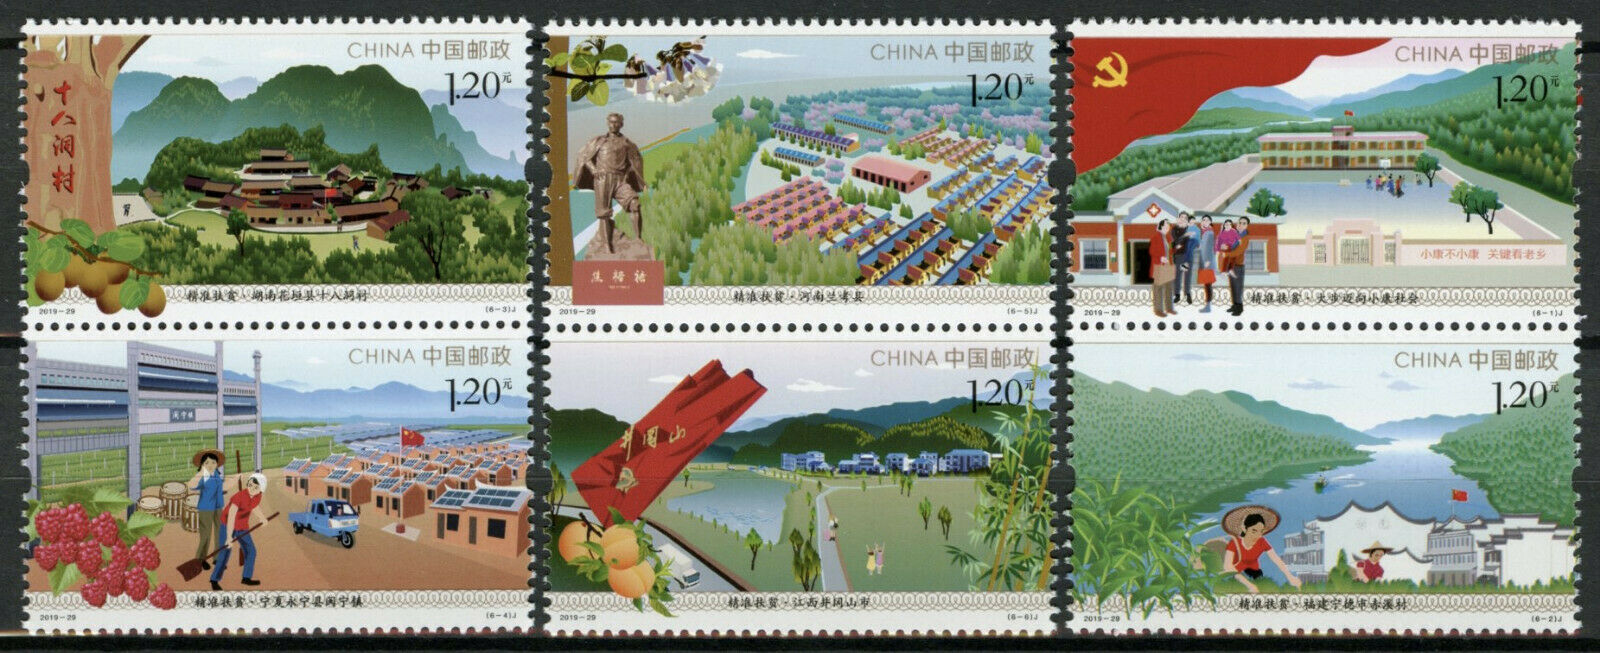 China Stamps 2019 MNH Alleviating Poverty Landscapes Flags Fruits 6v Set Pairs